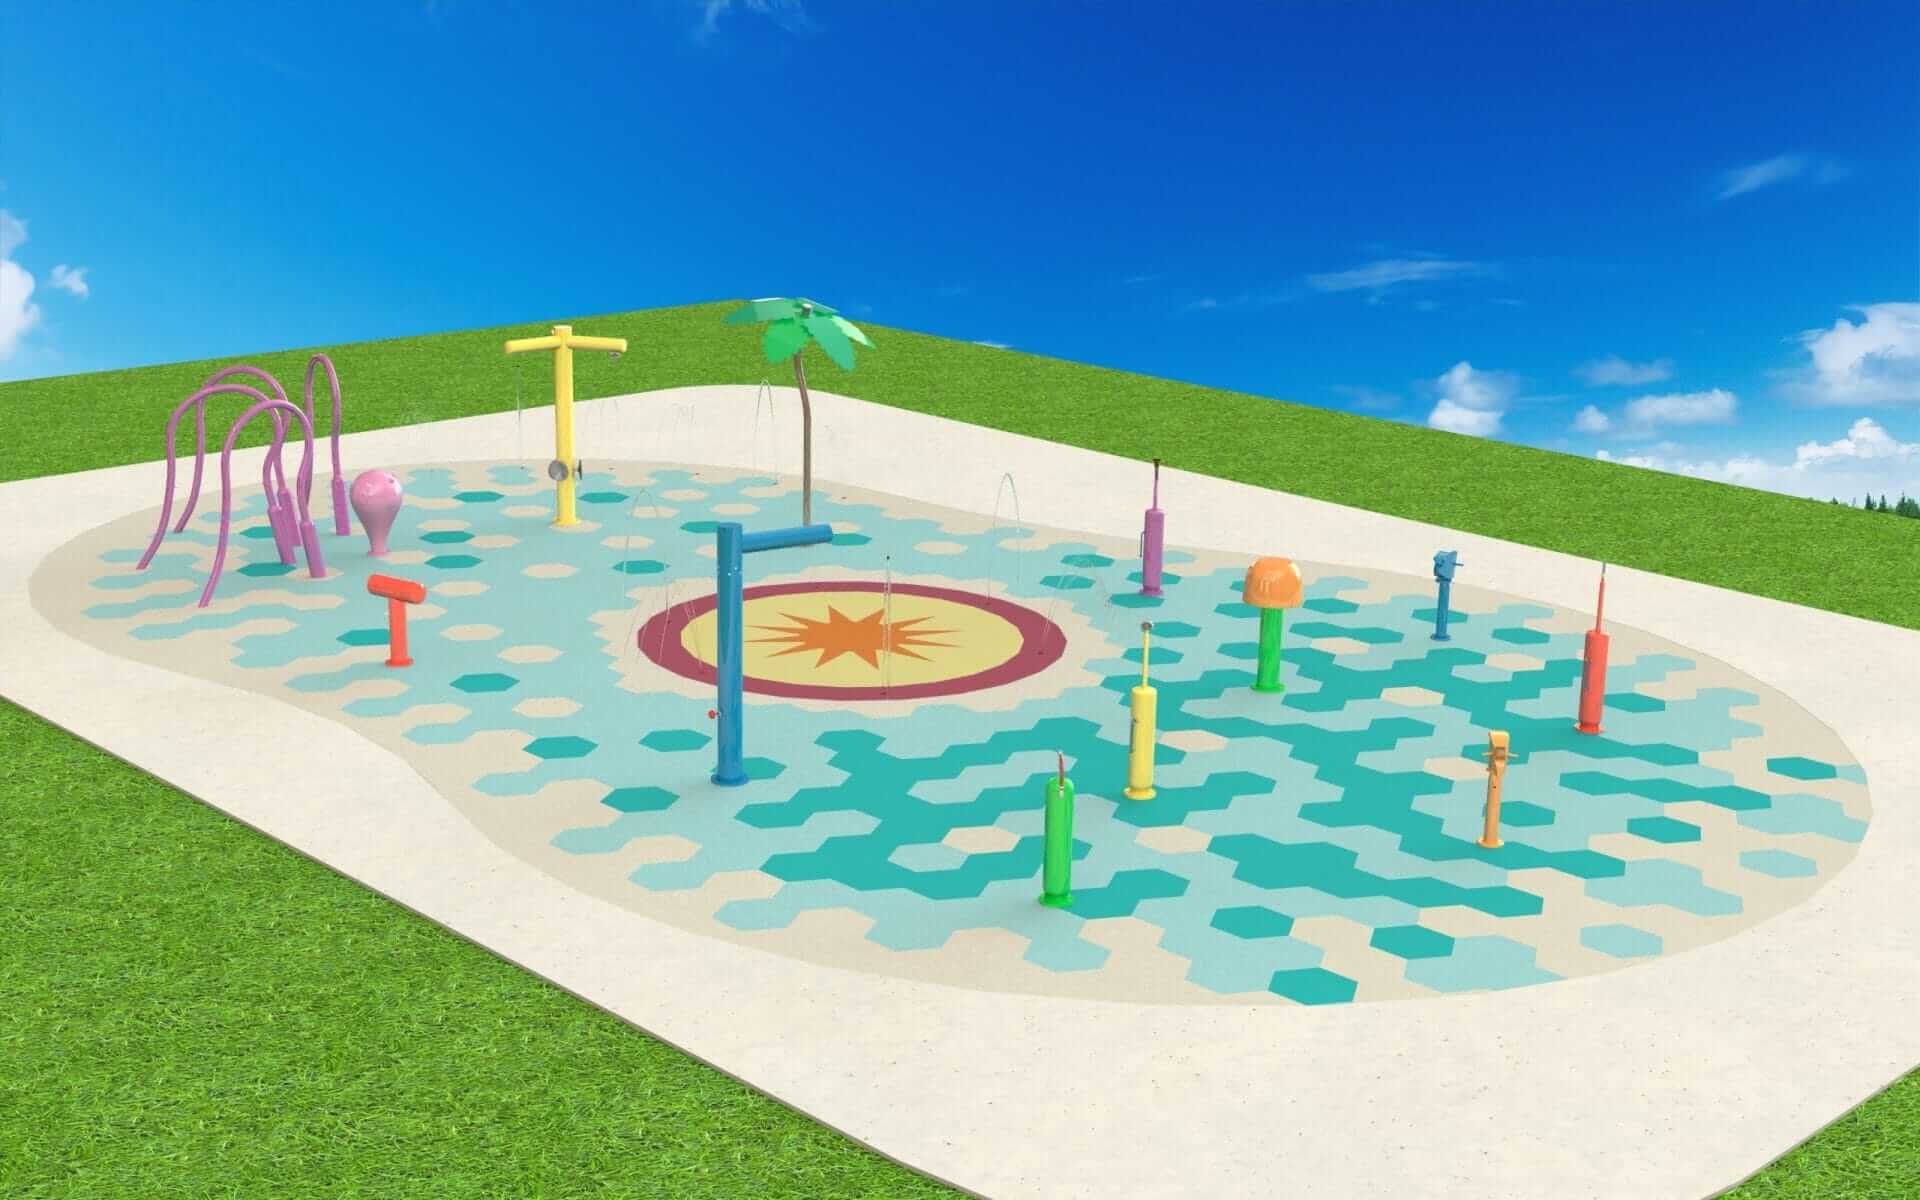 3D rendering of a splash pad concept design by Interactive Play.